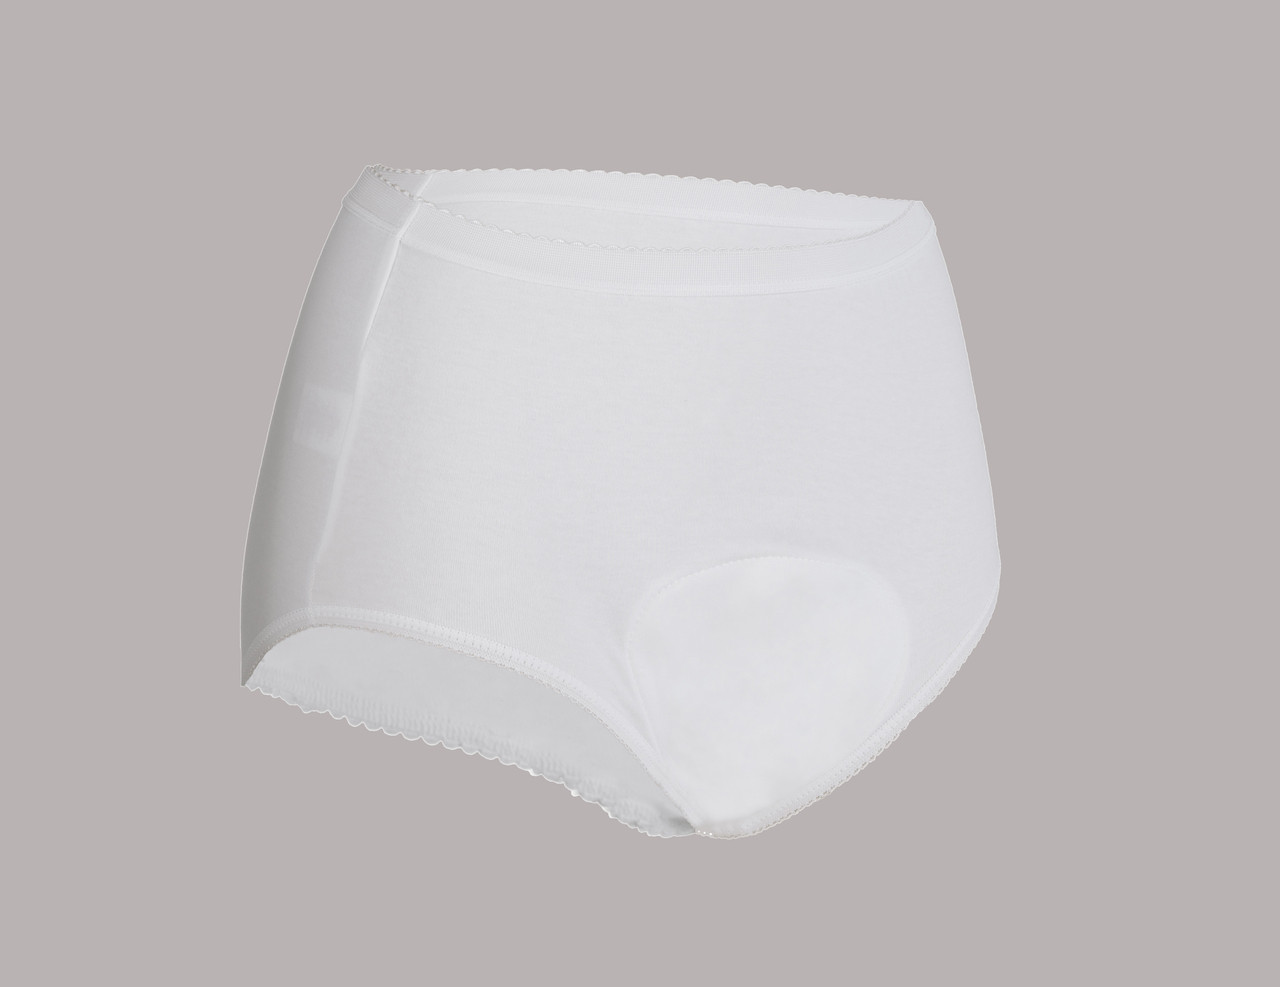 https://cdn11.bigcommerce.com/s-wxy7czp7hd/images/stencil/1280x1280/products/175/558/2001SW_-_LADIES_FULL_BRIEF_SUPER_-_WHITE_-_SIDE_IMAGE_copy__06438.1625044227.1280.1280__96116.1625228031.jpg?c=1